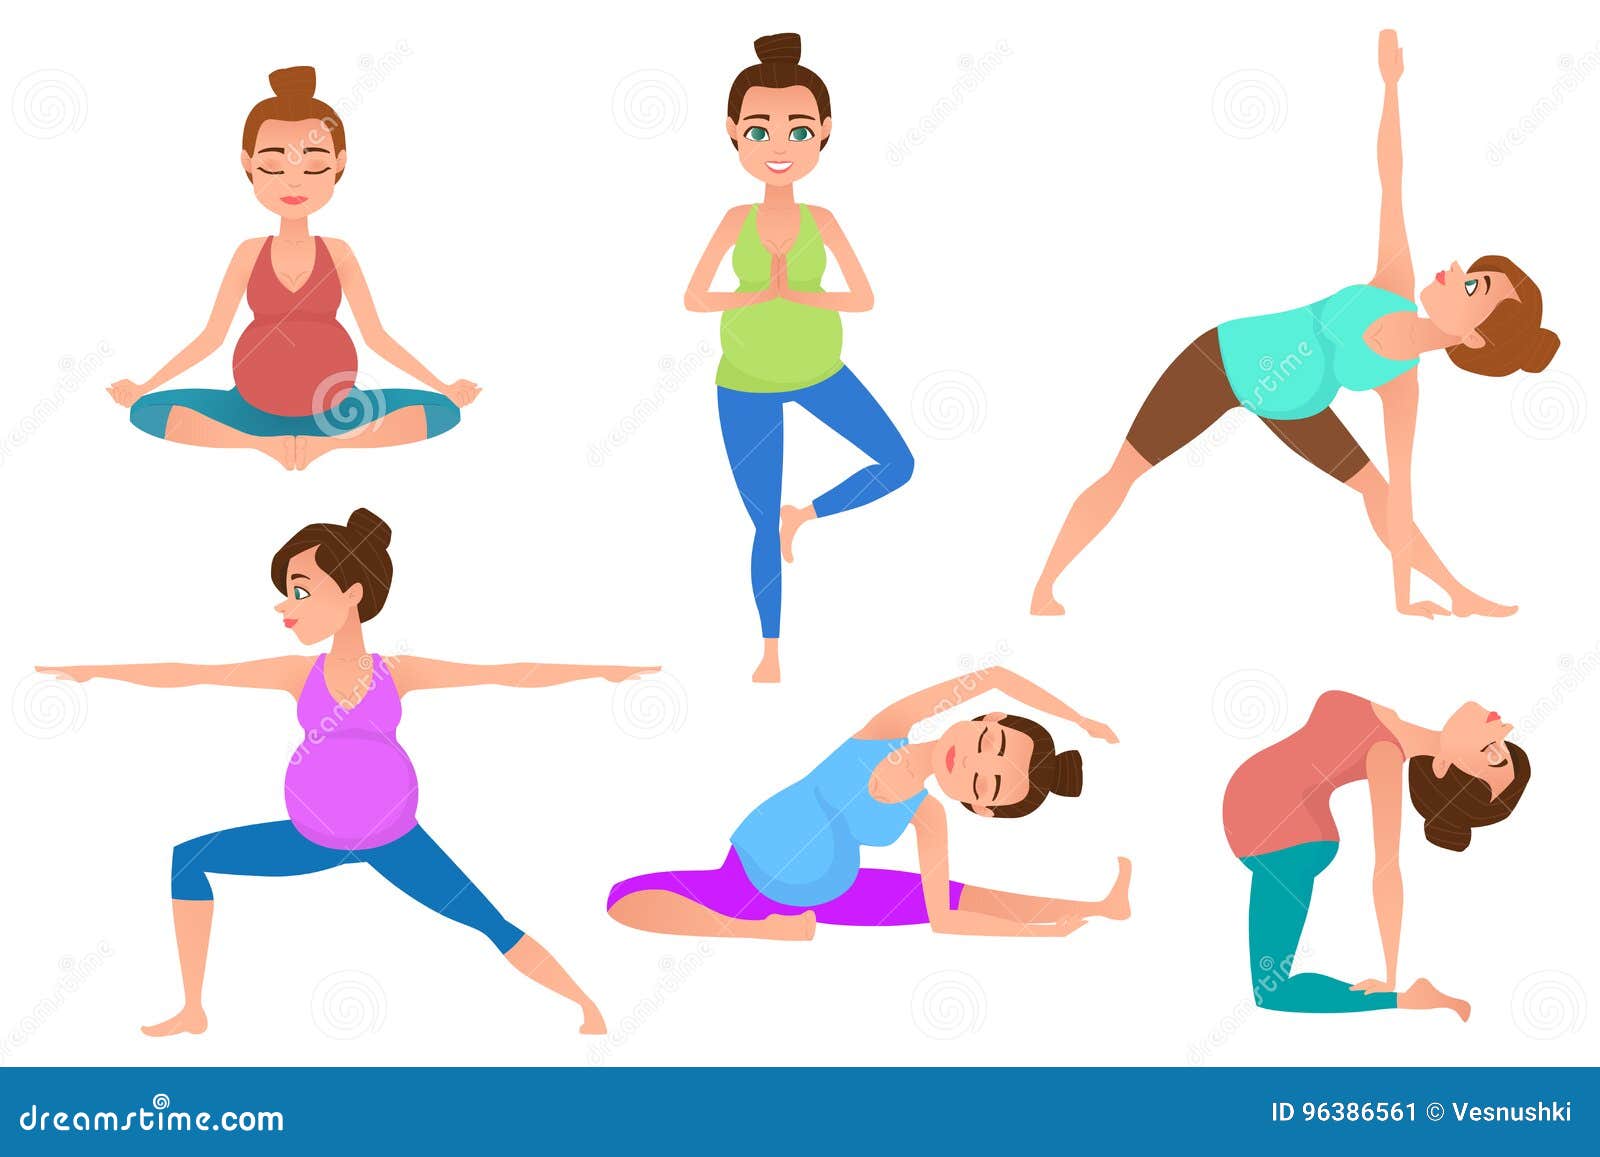 Best Yoga Poses During Pregnancy | Visual.ly